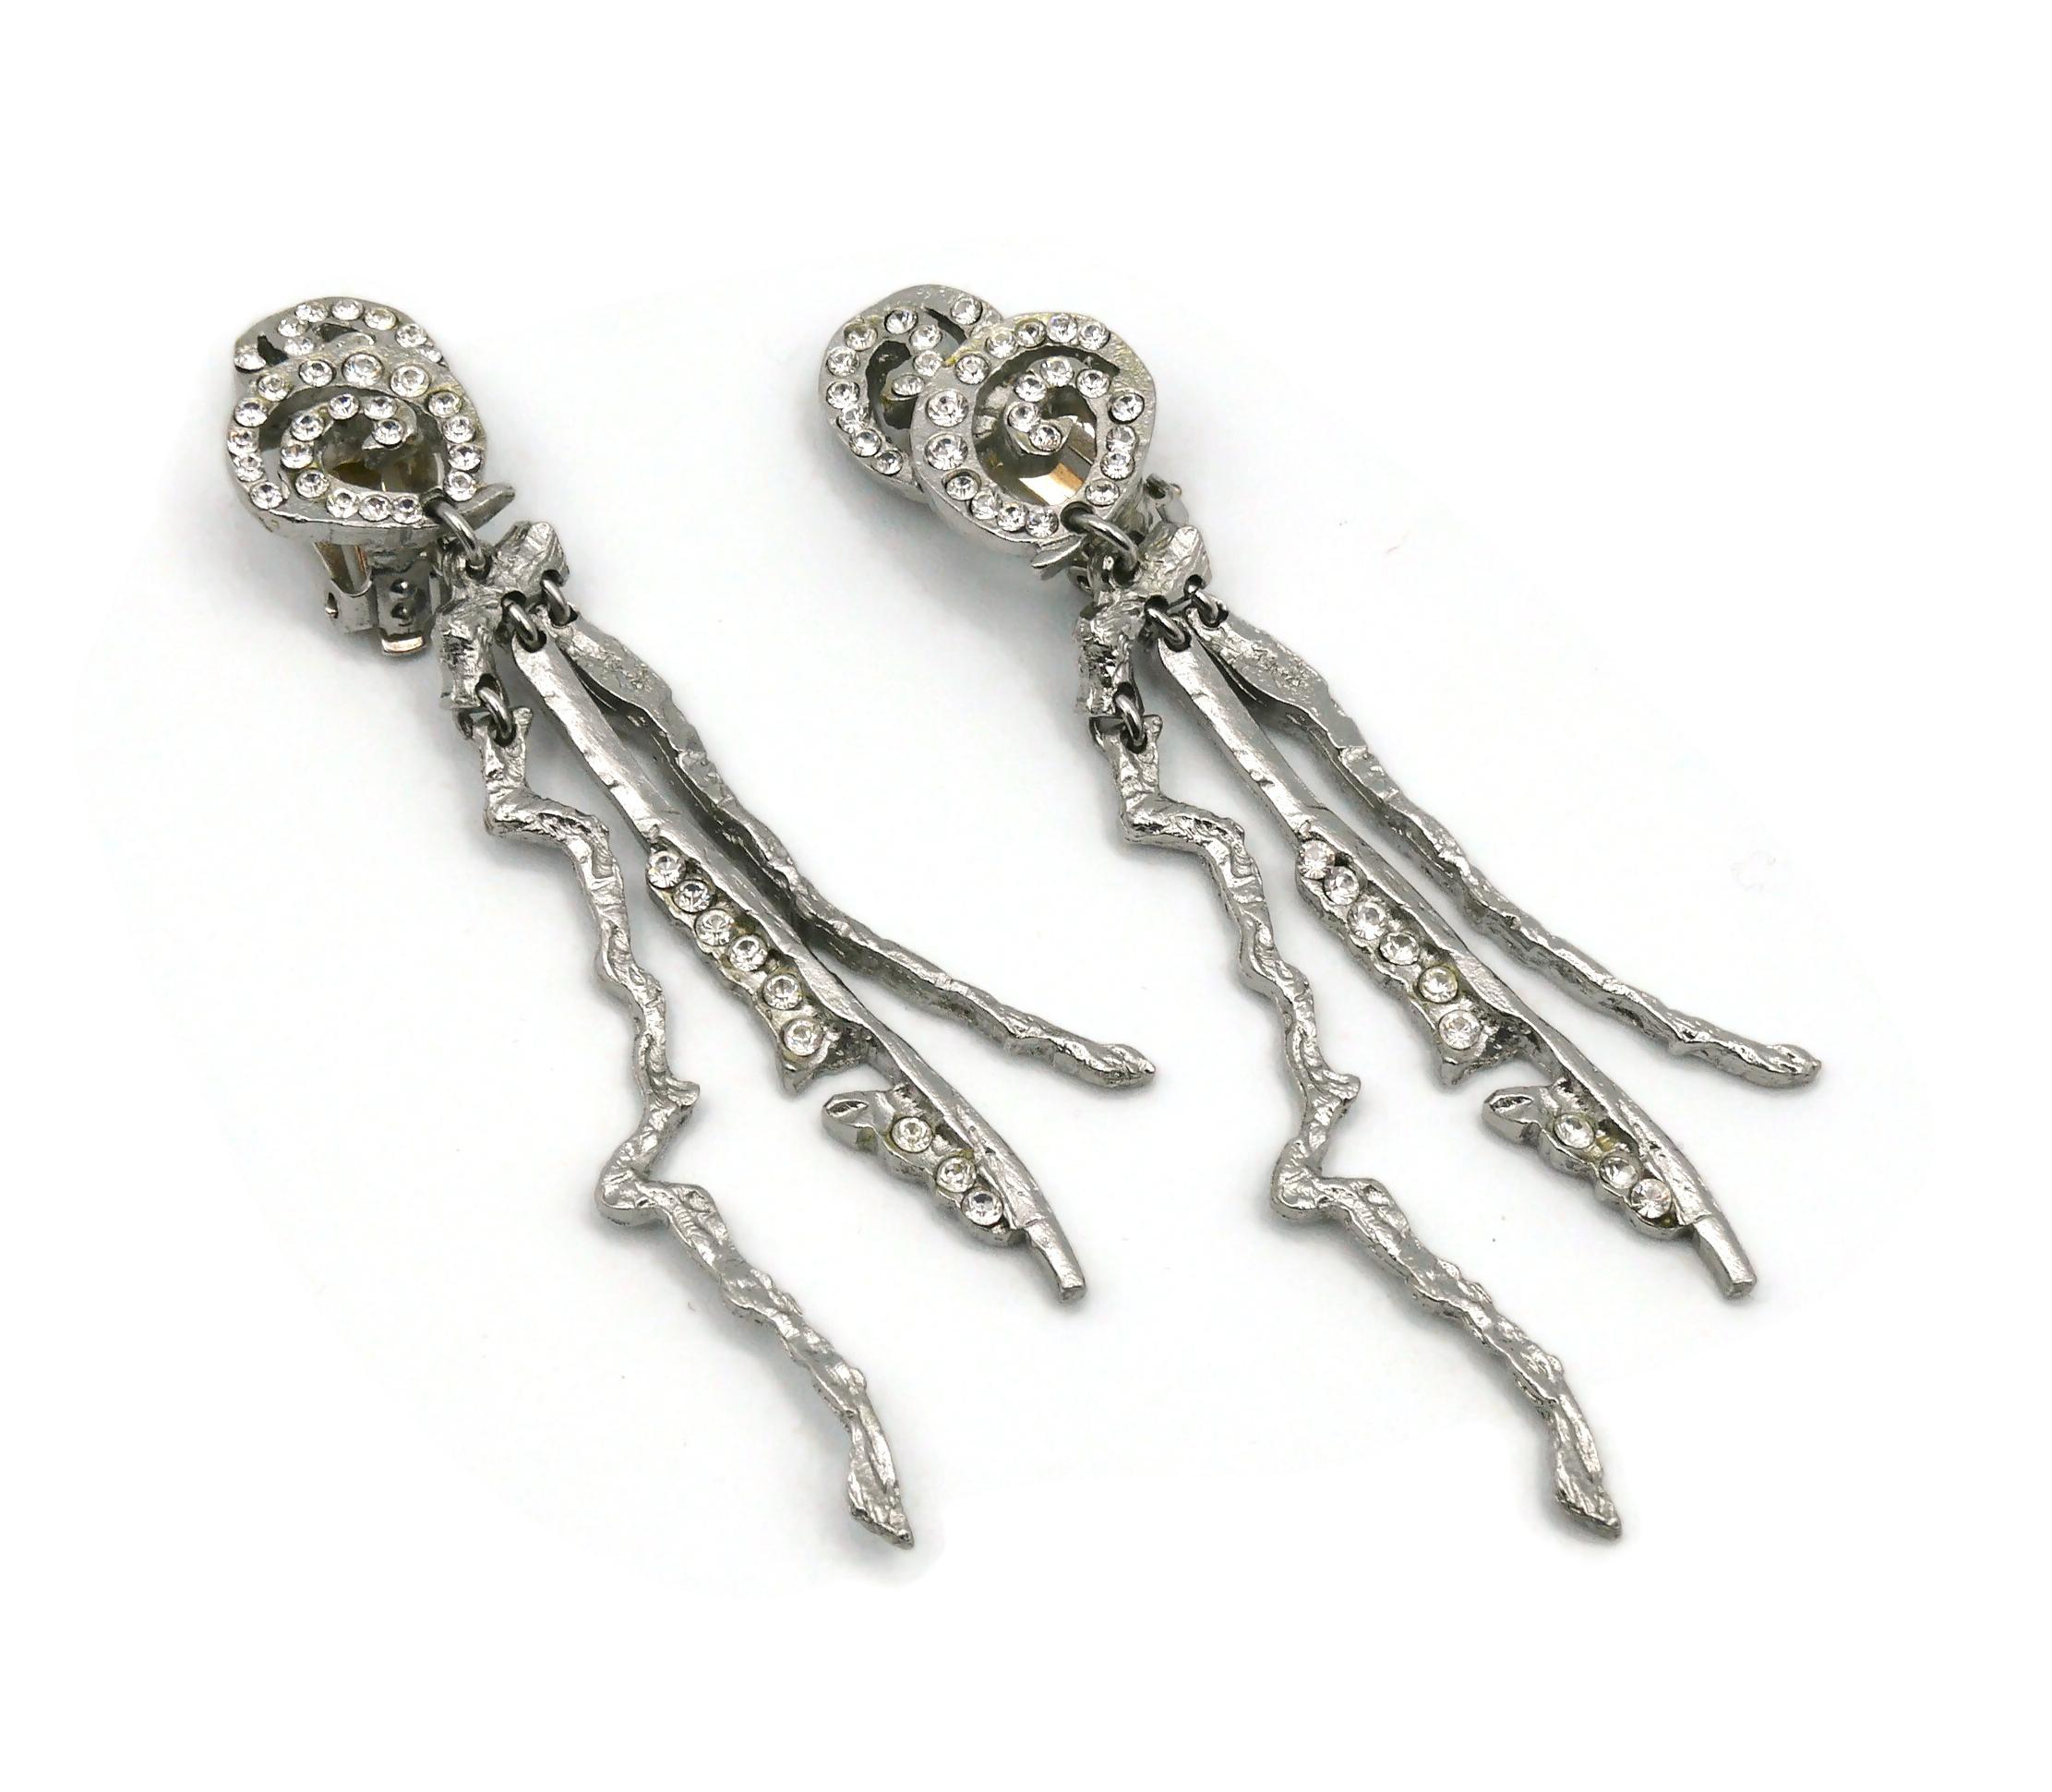 Christian Lacroix Vintage Embellished Brutalist Dangling Earrings In Good Condition For Sale In Nice, FR